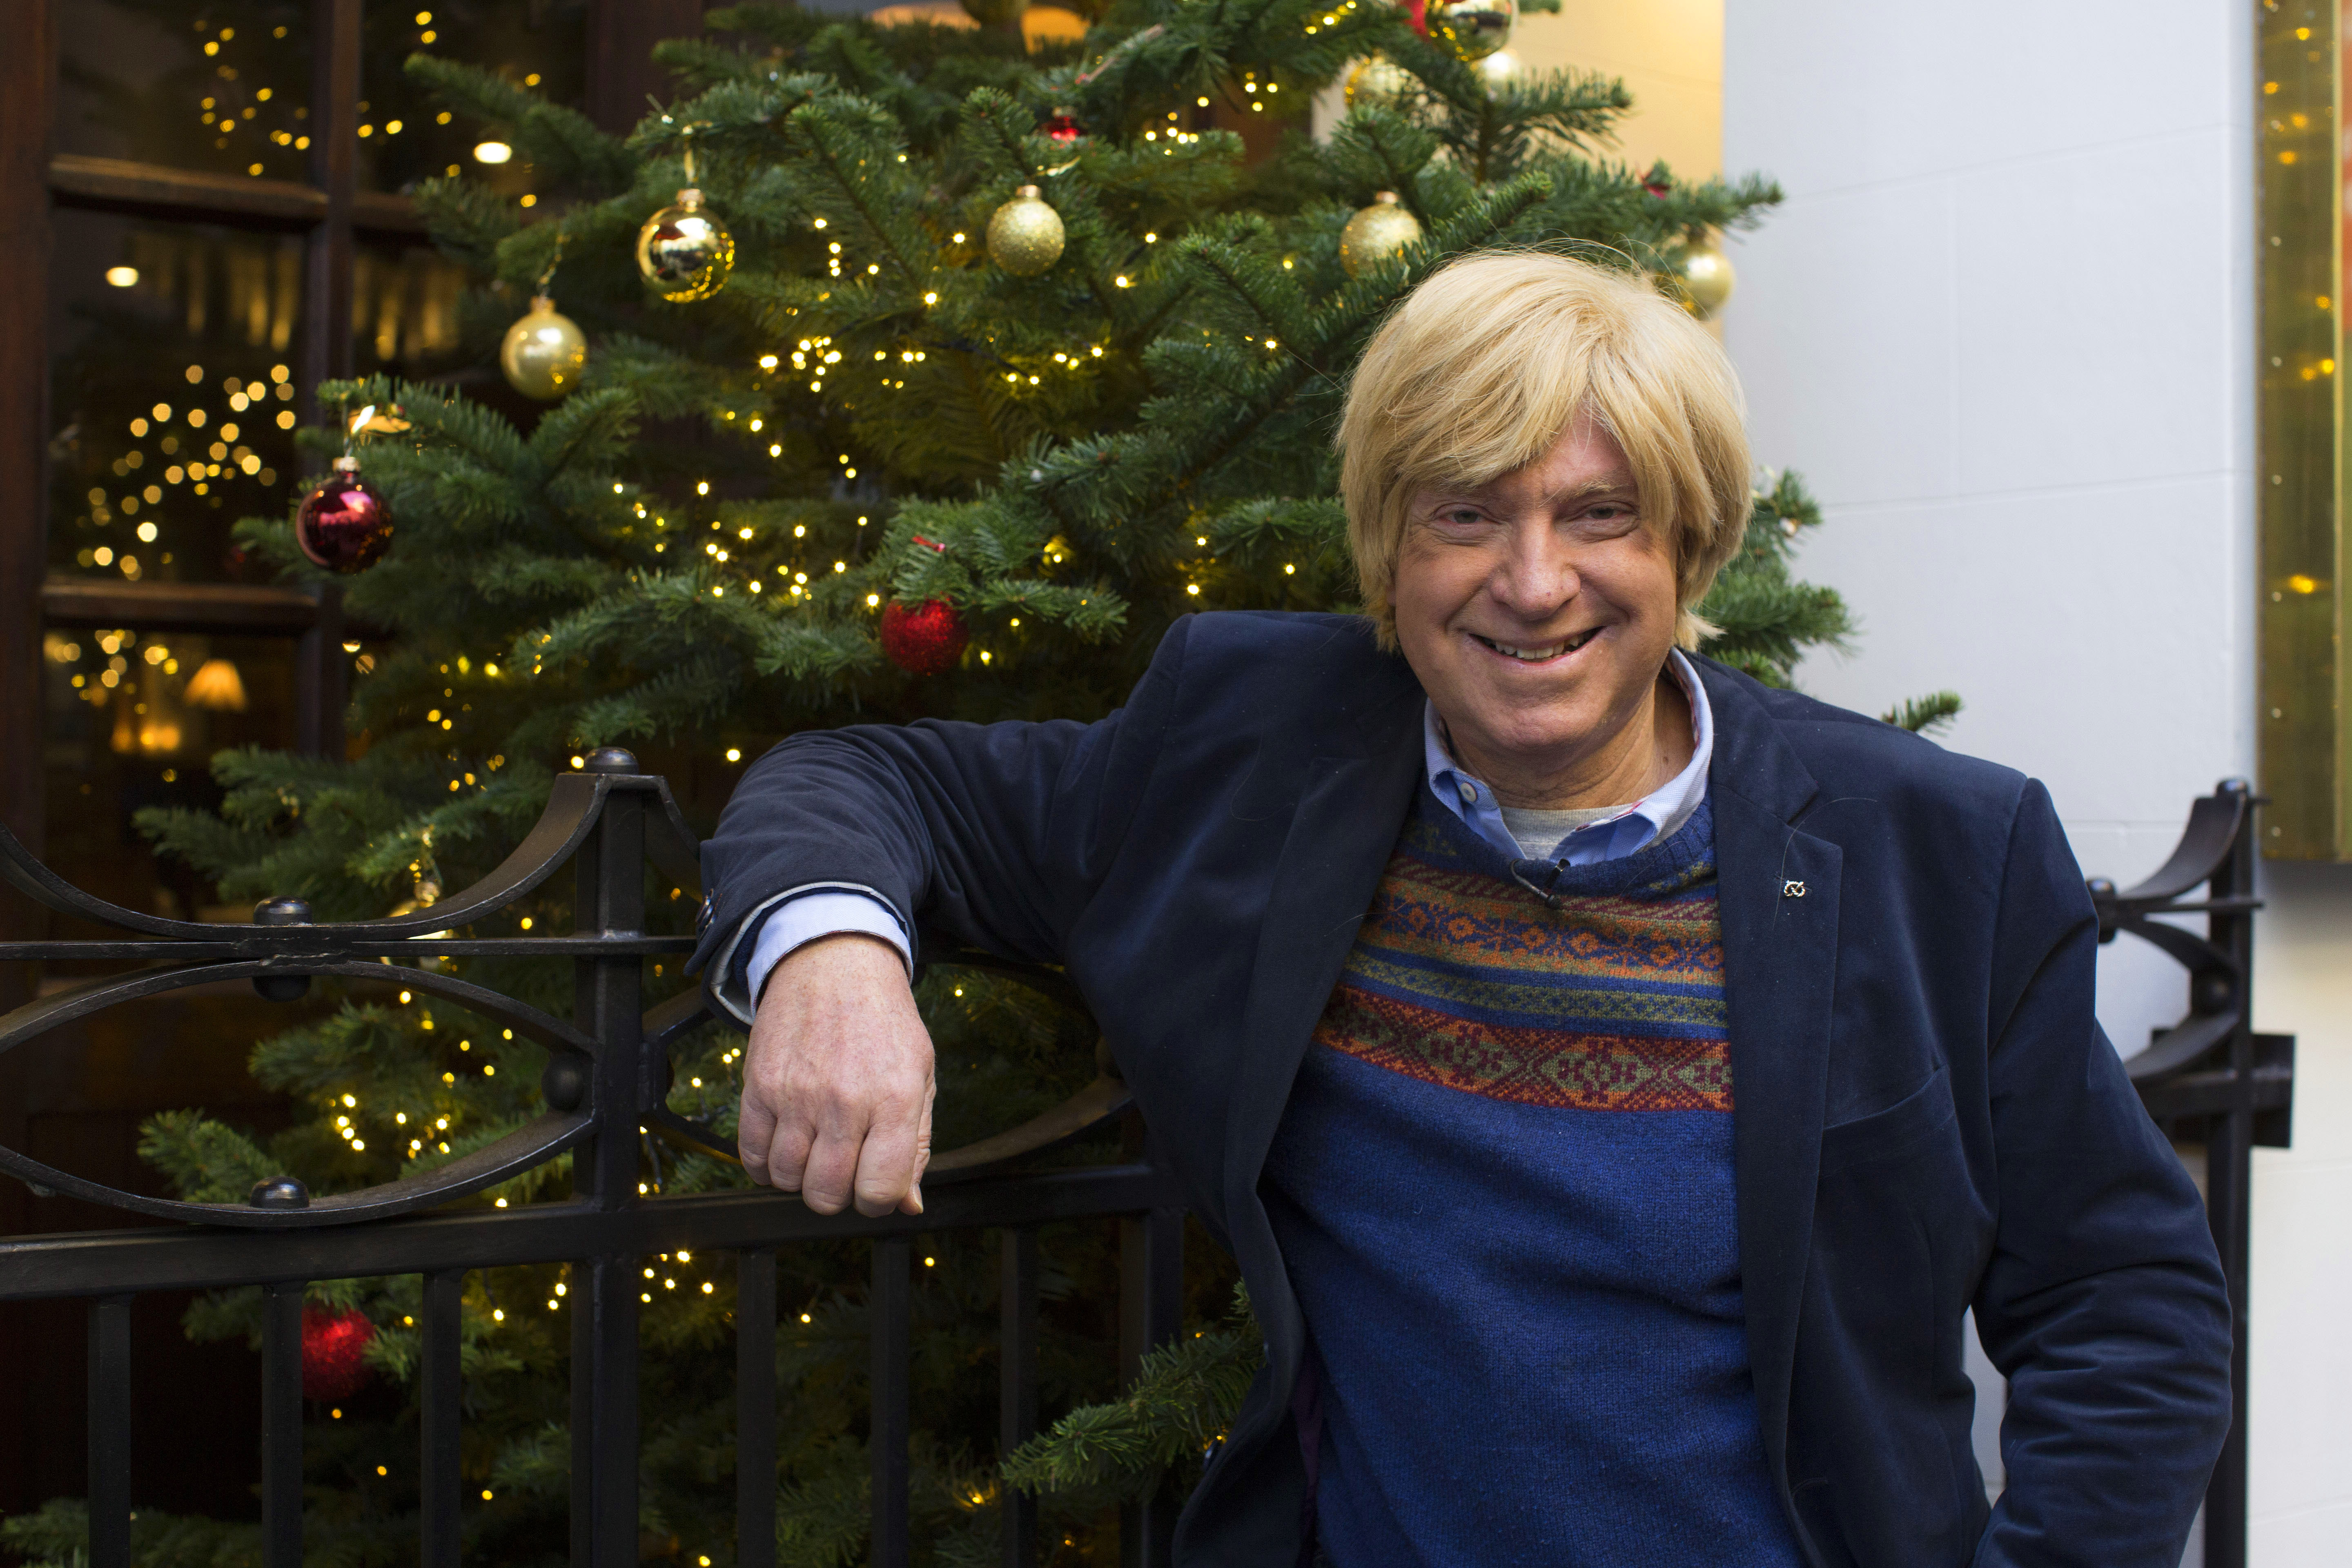 Michael Fabricant | Member of Parliament for the Lichfield Constituency